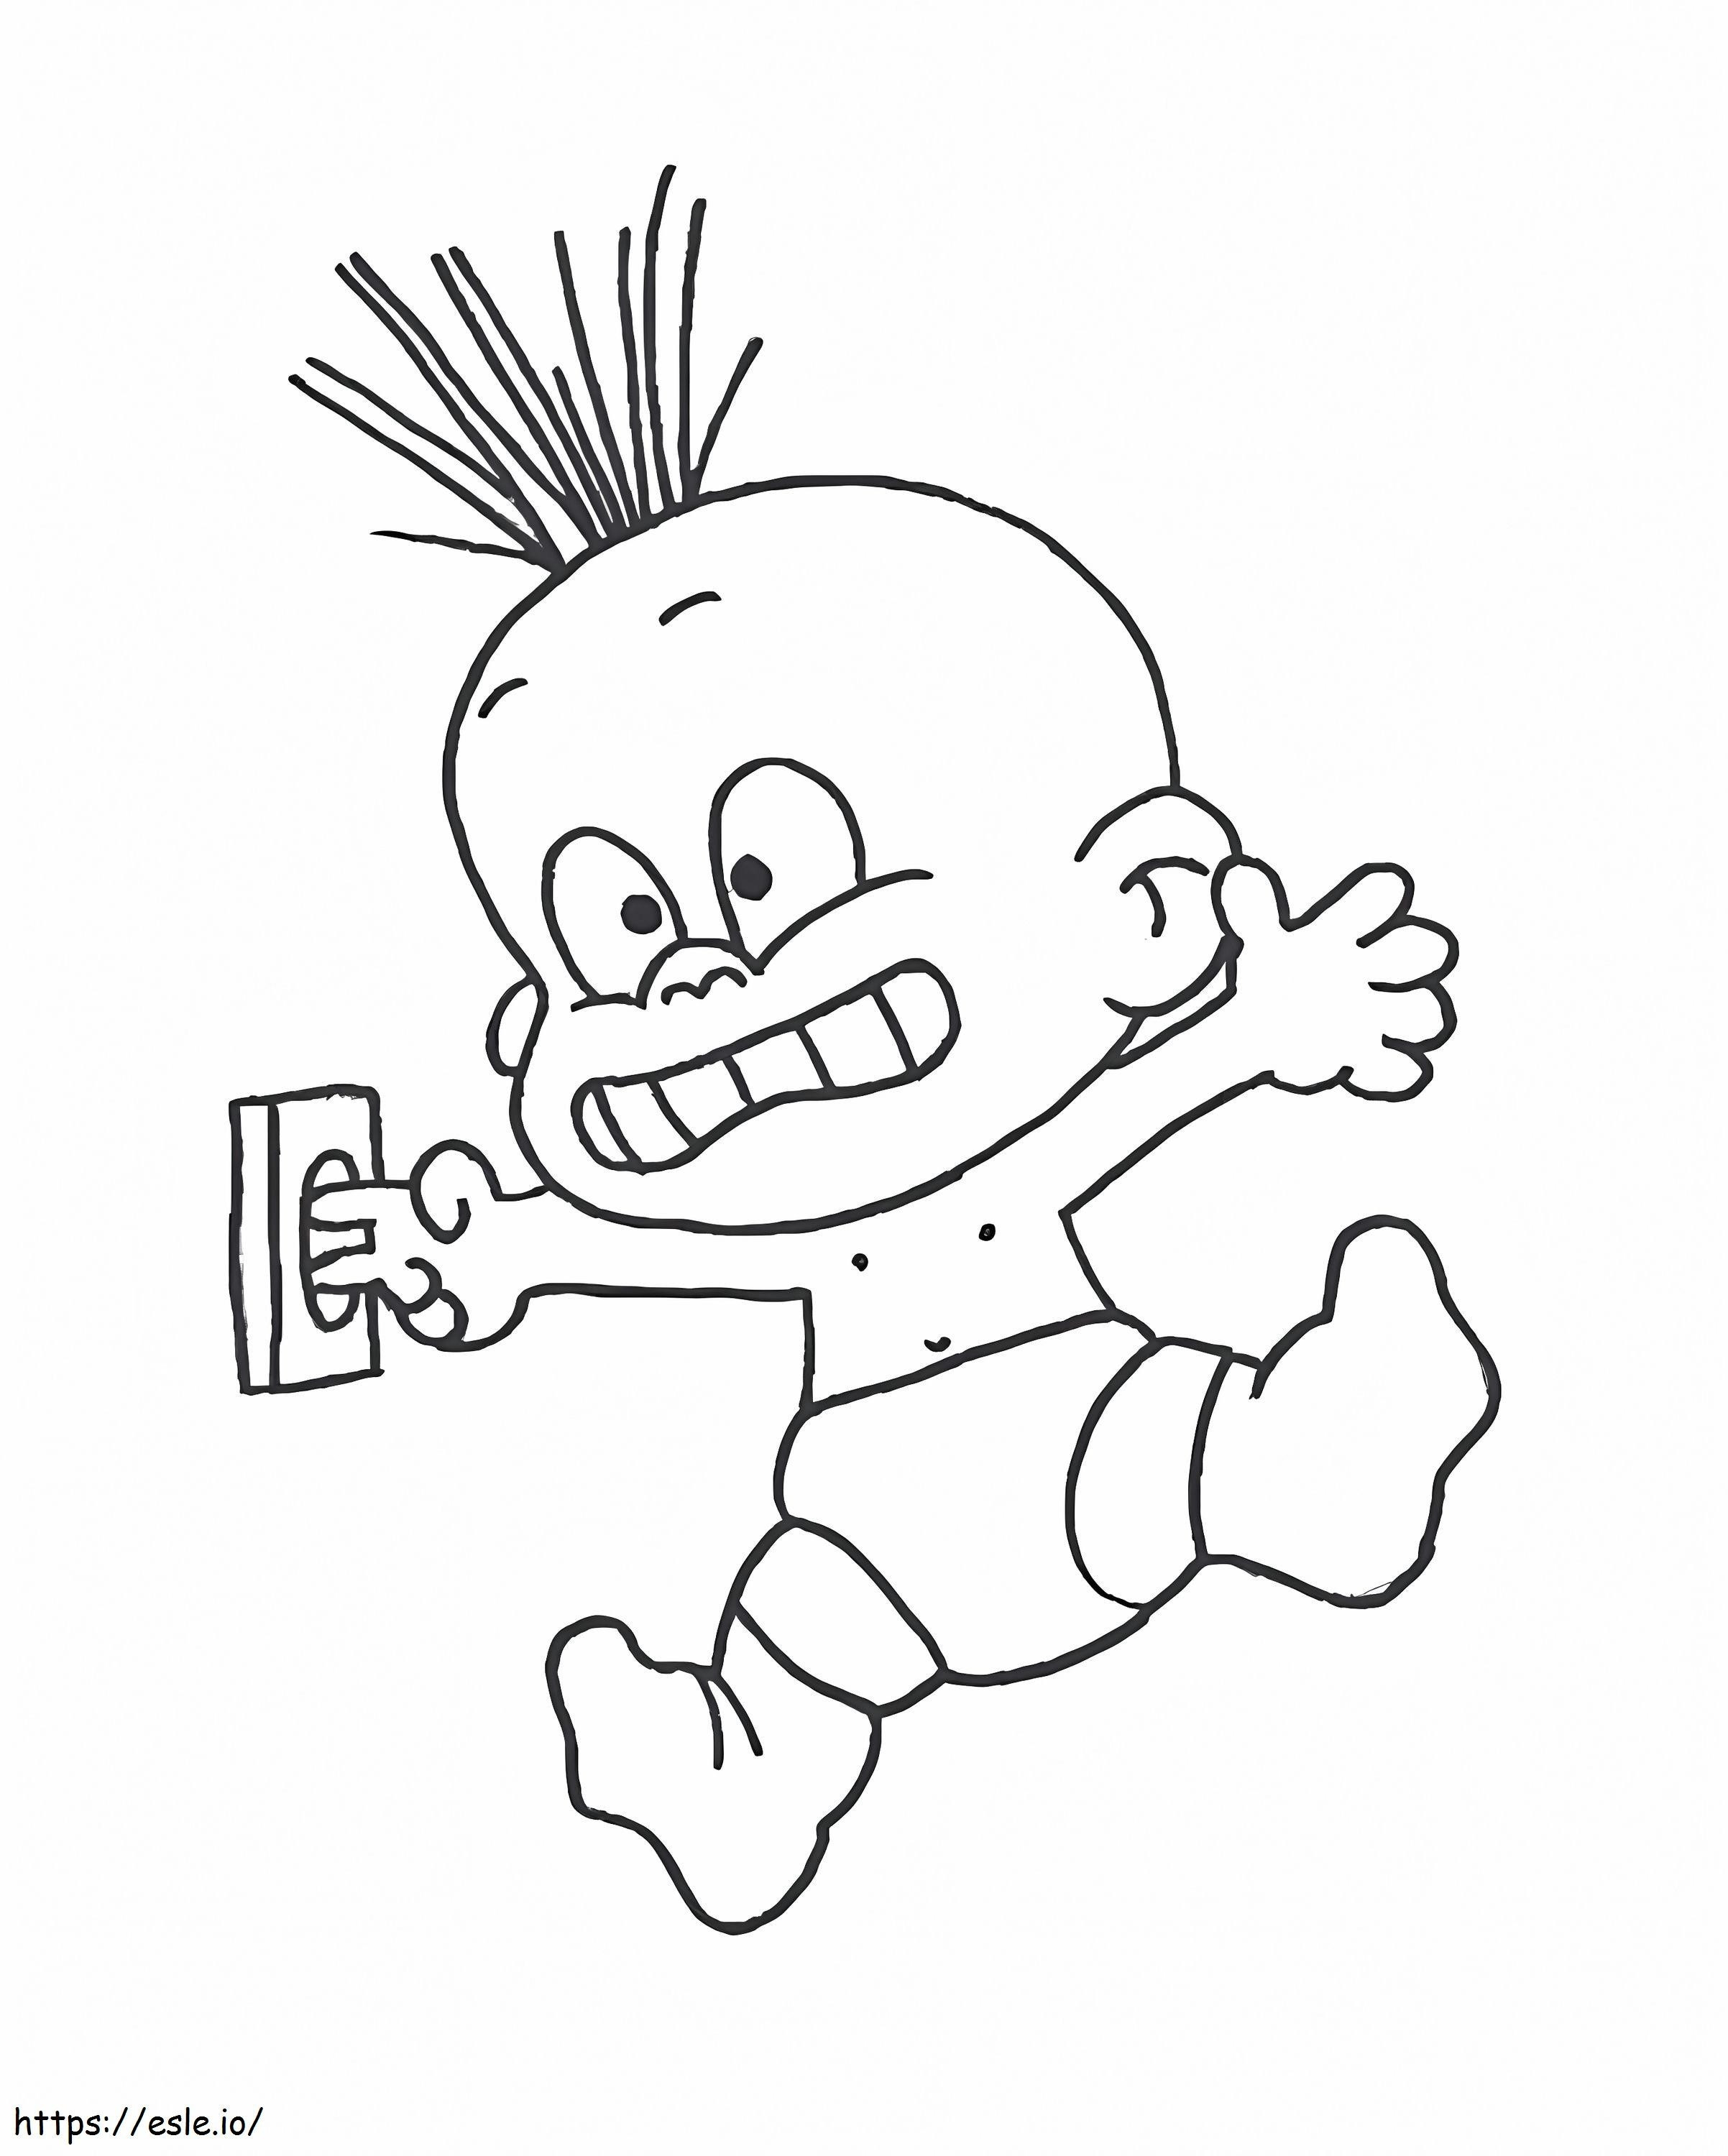 Winnie Diaper 1 coloring page